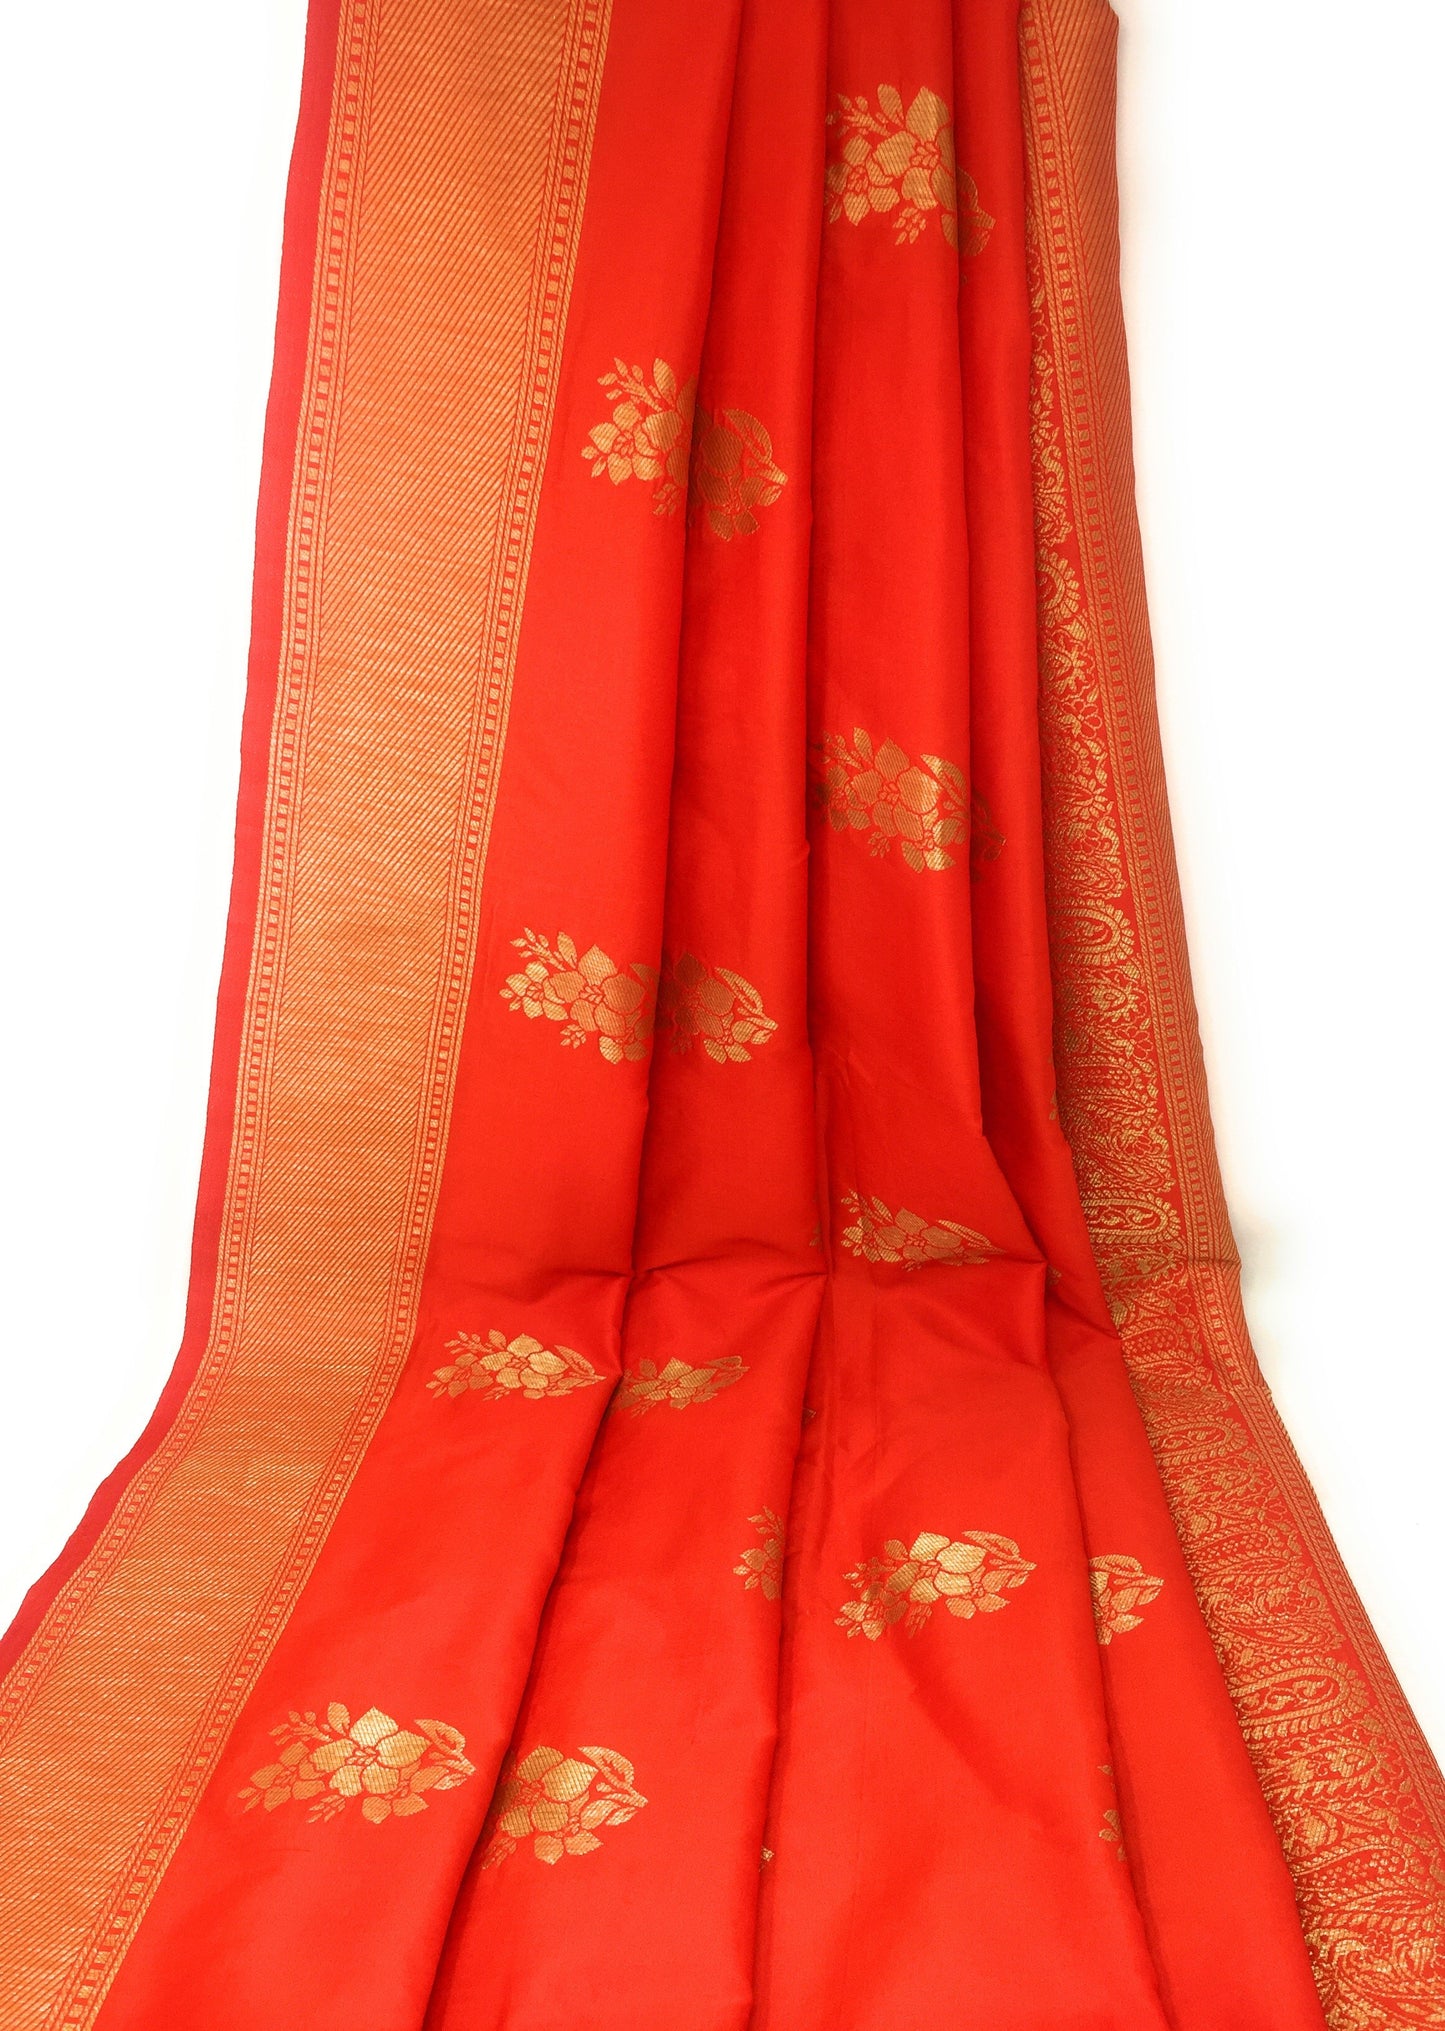 Brocade Fabric In Tomato Red And Gold  